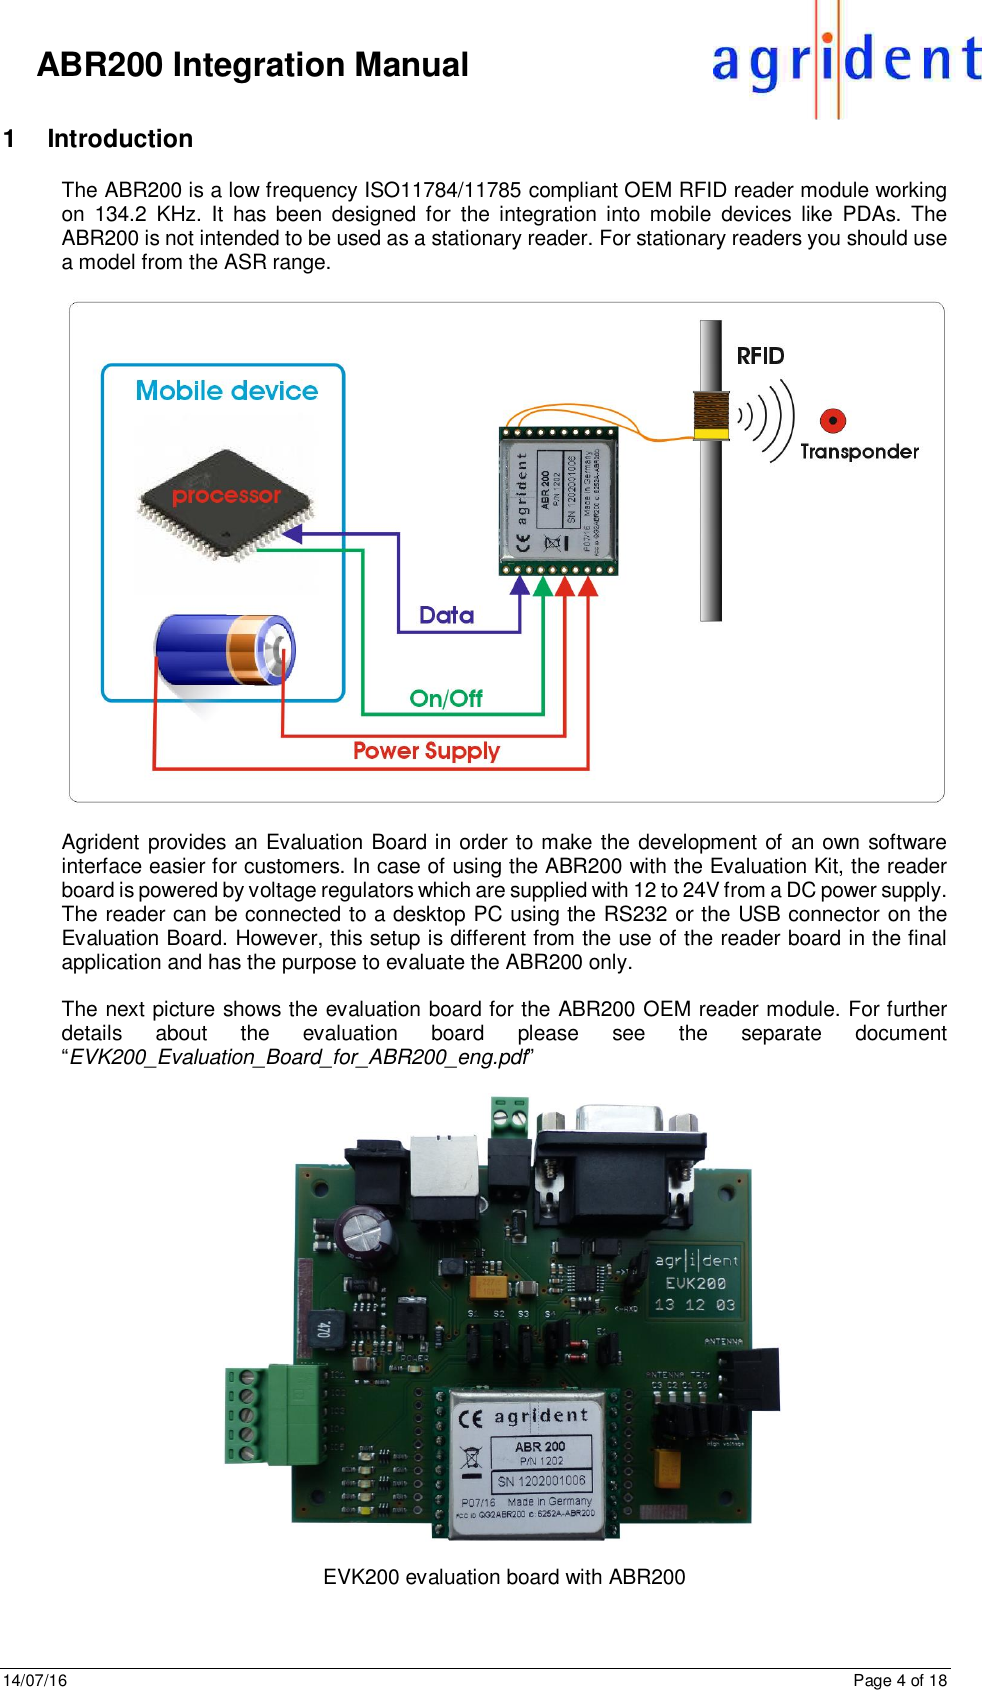 14/07/16      Page 4 of 18      ABR200 Integration Manual 1  Introduction The ABR200 is a low frequency ISO11784/11785 compliant OEM RFID reader module working on  134.2  KHz.  It  has  been  designed  for  the integration into  mobile  devices  like  PDAs.  The ABR200 is not intended to be used as a stationary reader. For stationary readers you should use a model from the ASR range.    Agrident provides an Evaluation Board in order to make the development of an own software interface easier for customers. In case of using the ABR200 with the Evaluation Kit, the reader board is powered by voltage regulators which are supplied with 12 to 24V from a DC power supply. The reader can be connected to a desktop PC using the RS232 or the USB connector on the Evaluation Board. However, this setup is different from the use of the reader board in the final application and has the purpose to evaluate the ABR200 only.  The next picture shows the evaluation board for the ABR200 OEM reader module. For further details  about  the  evaluation  board  please  see  the  separate  document “EVK200_Evaluation_Board_for_ABR200_eng.pdf”    EVK200 evaluation board with ABR200   